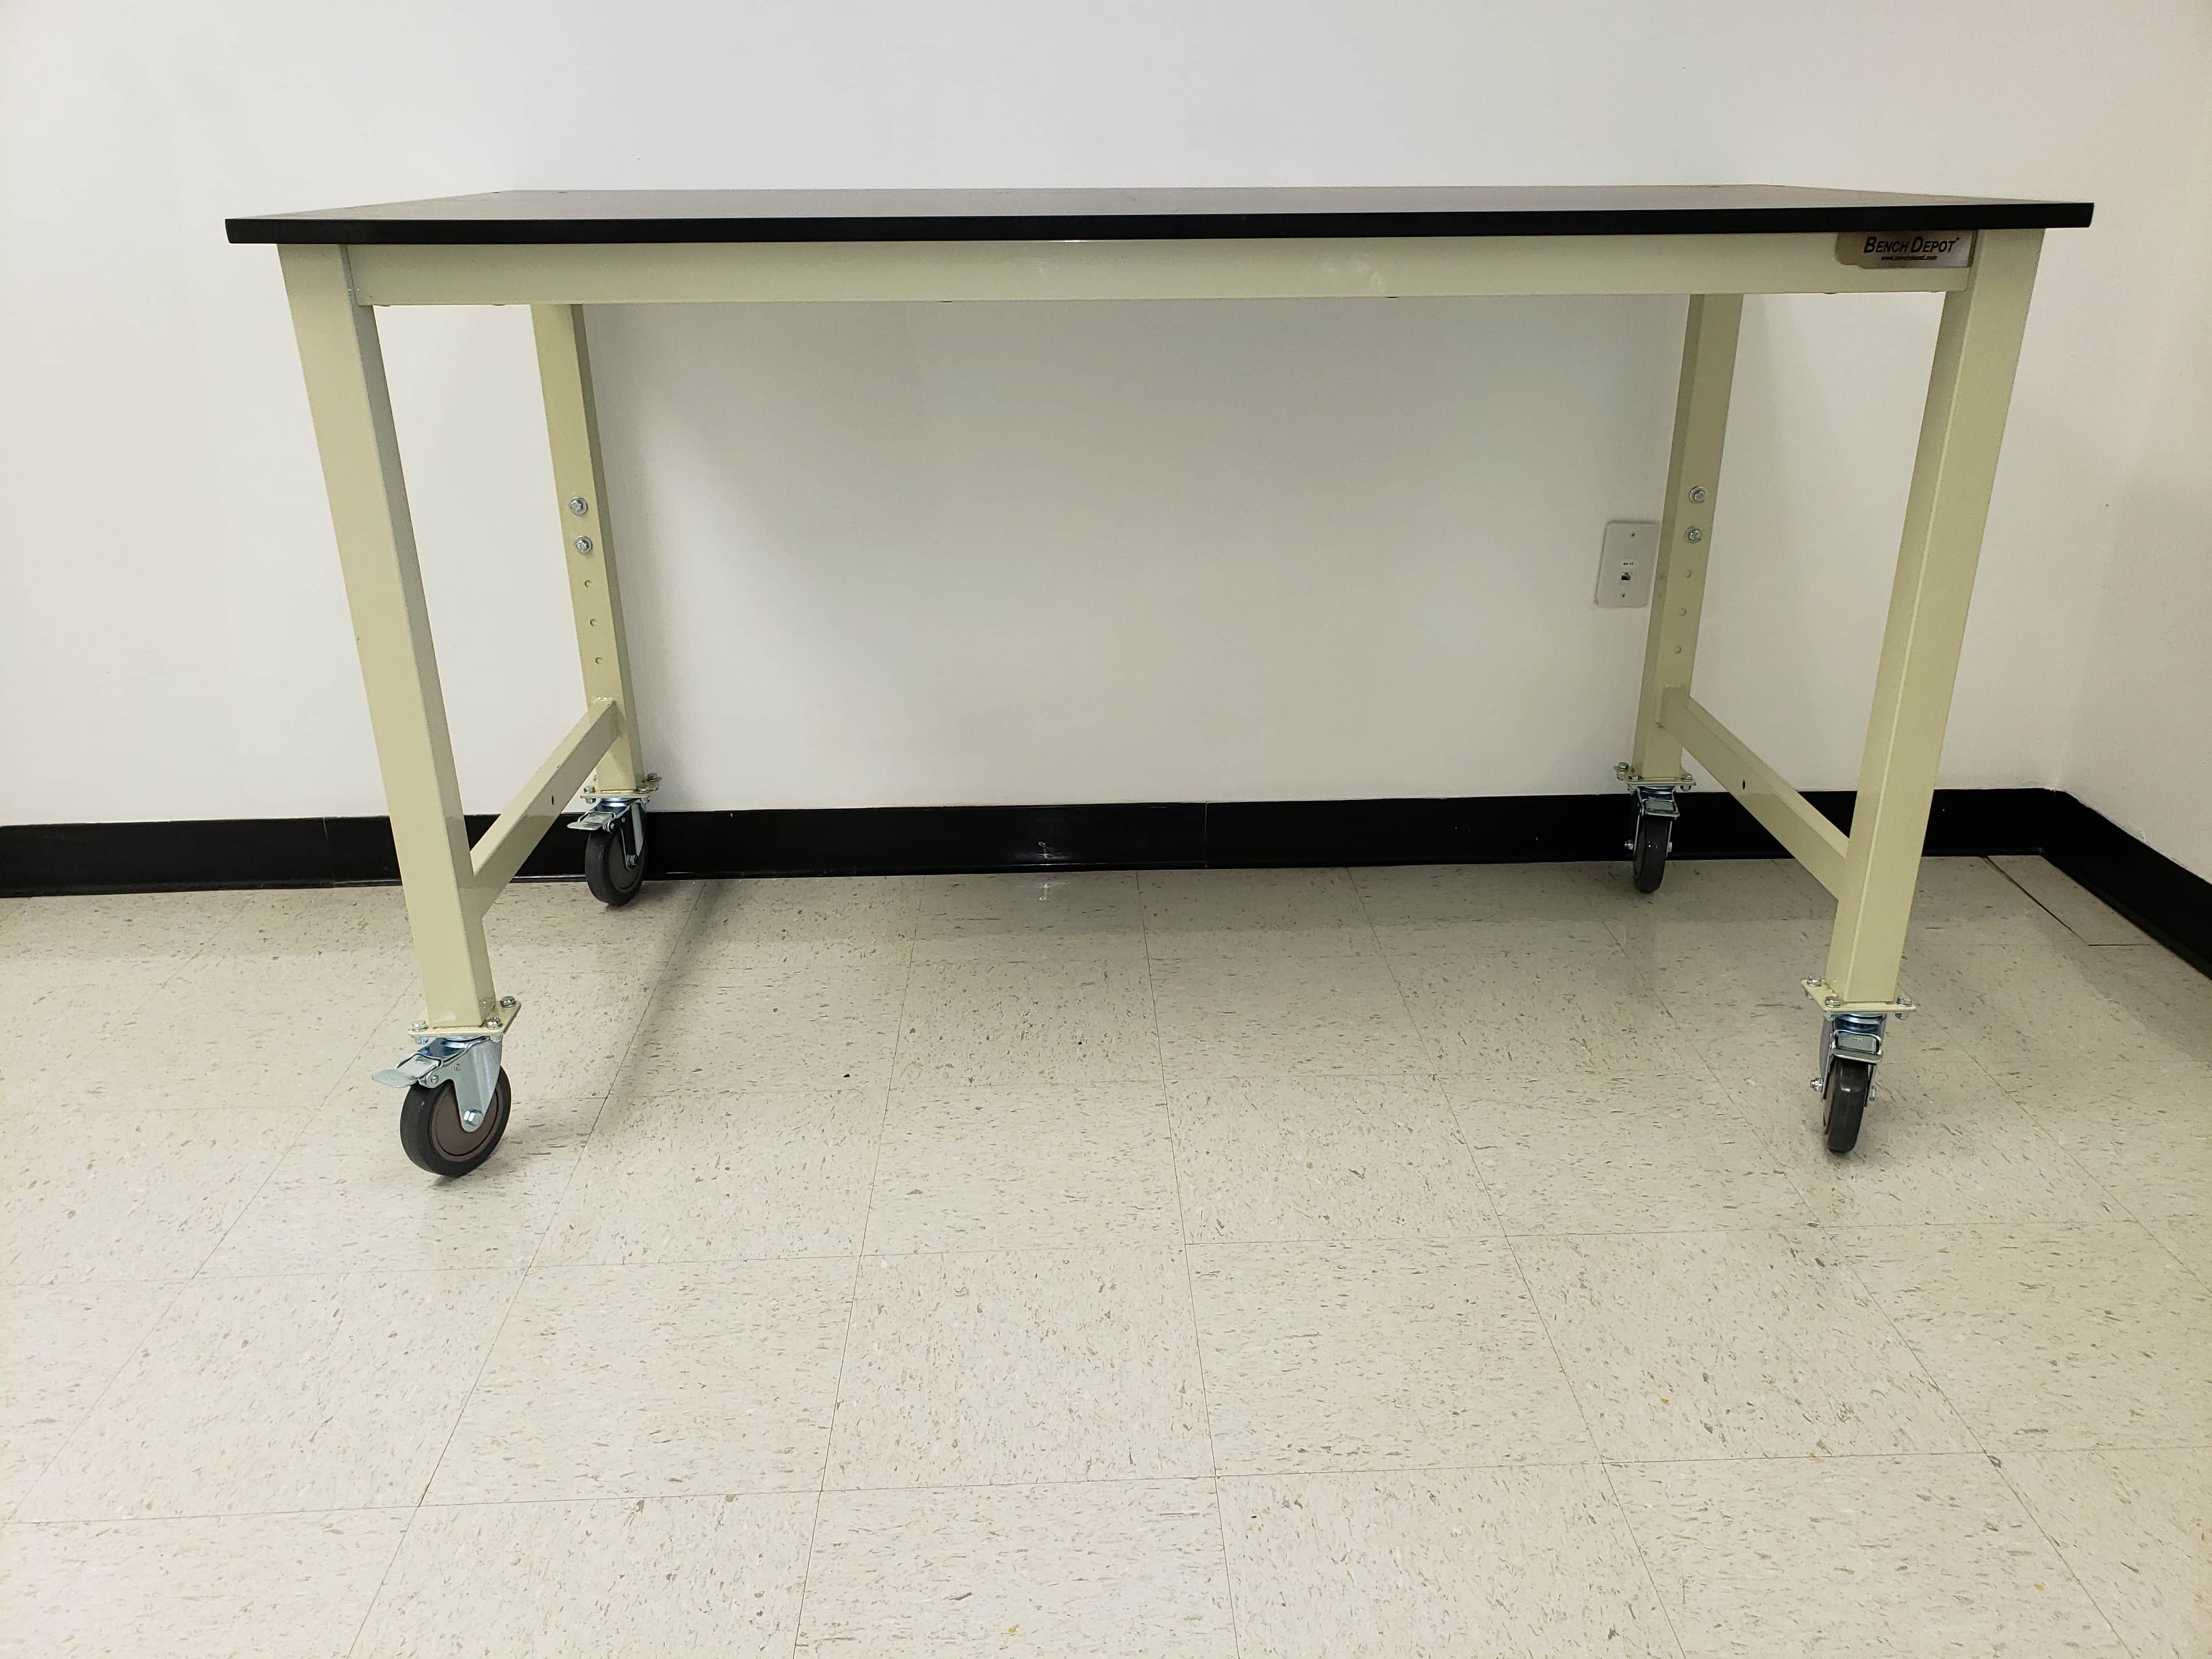 6 foot adjustable lab table (72" long x 30" deep) - (30-36" height) with phenolic resin countertop (NEW)